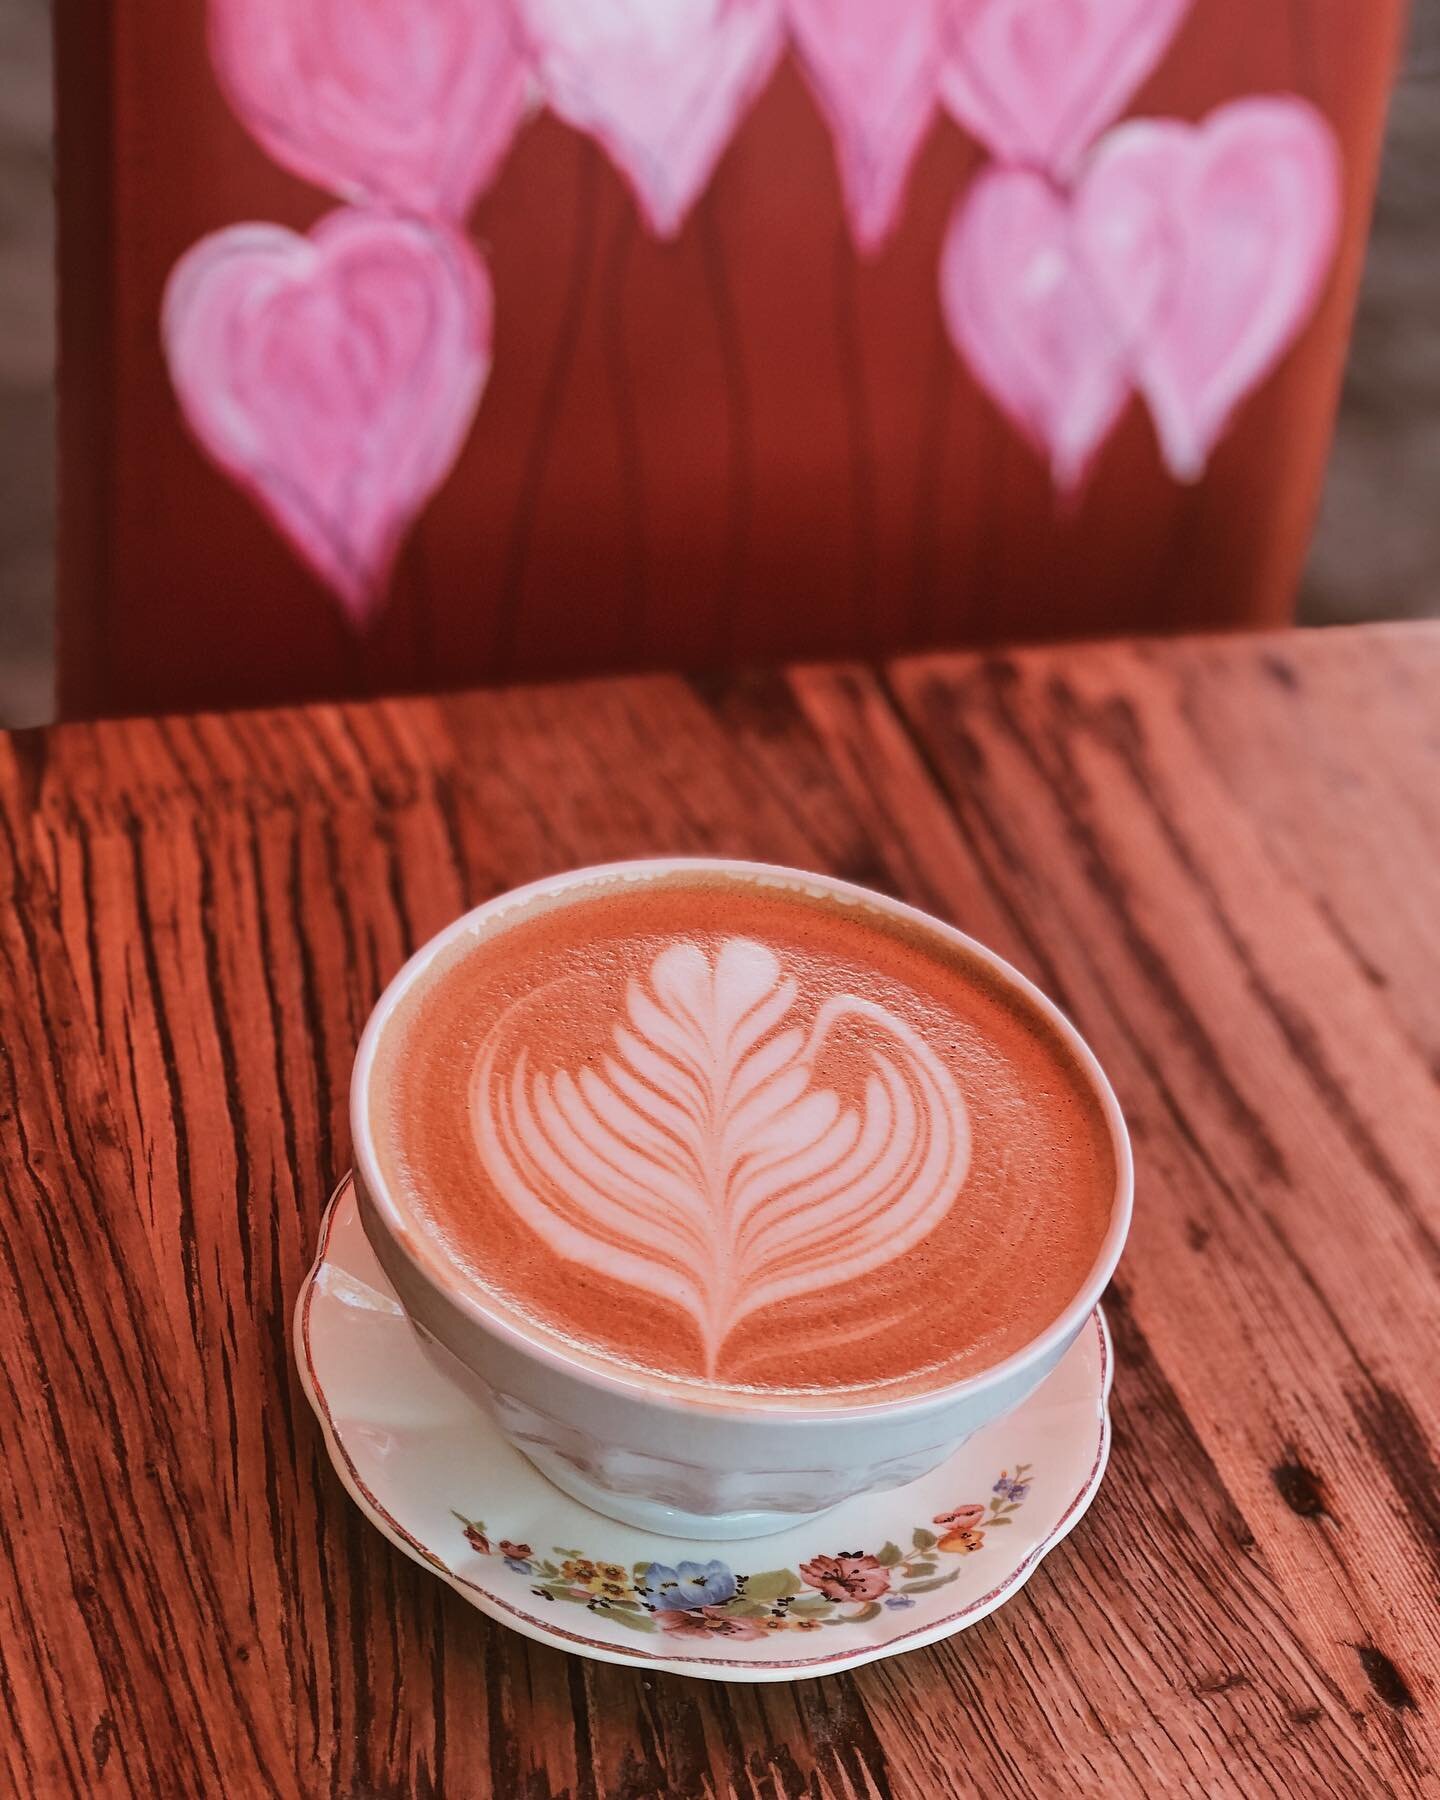 Lattes all day everyday! Open at 8am for coffee &amp; pastries, Monday-Sunday🌷
&bull;
&bull;
&bull;
#restaurant #food #foodie #instafood #dinner #bar #delicious #yummy #foodphotography #foodlover #cafe #lunch  #foodstagram #instagood #hotel #love #f